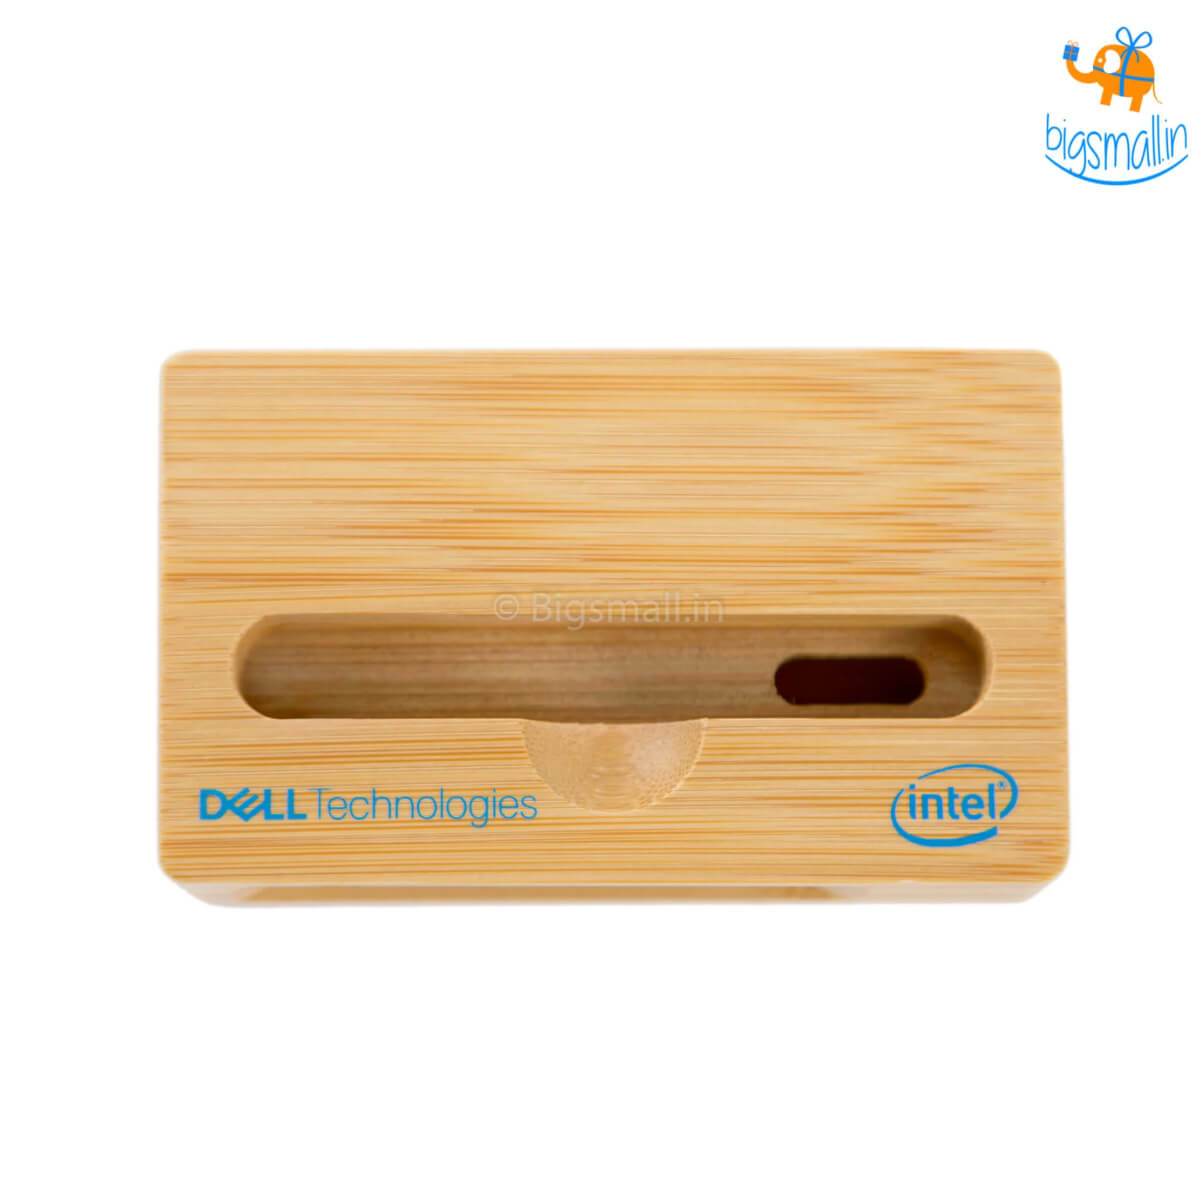 Mobile Stand Amplifier - Dell & Intel